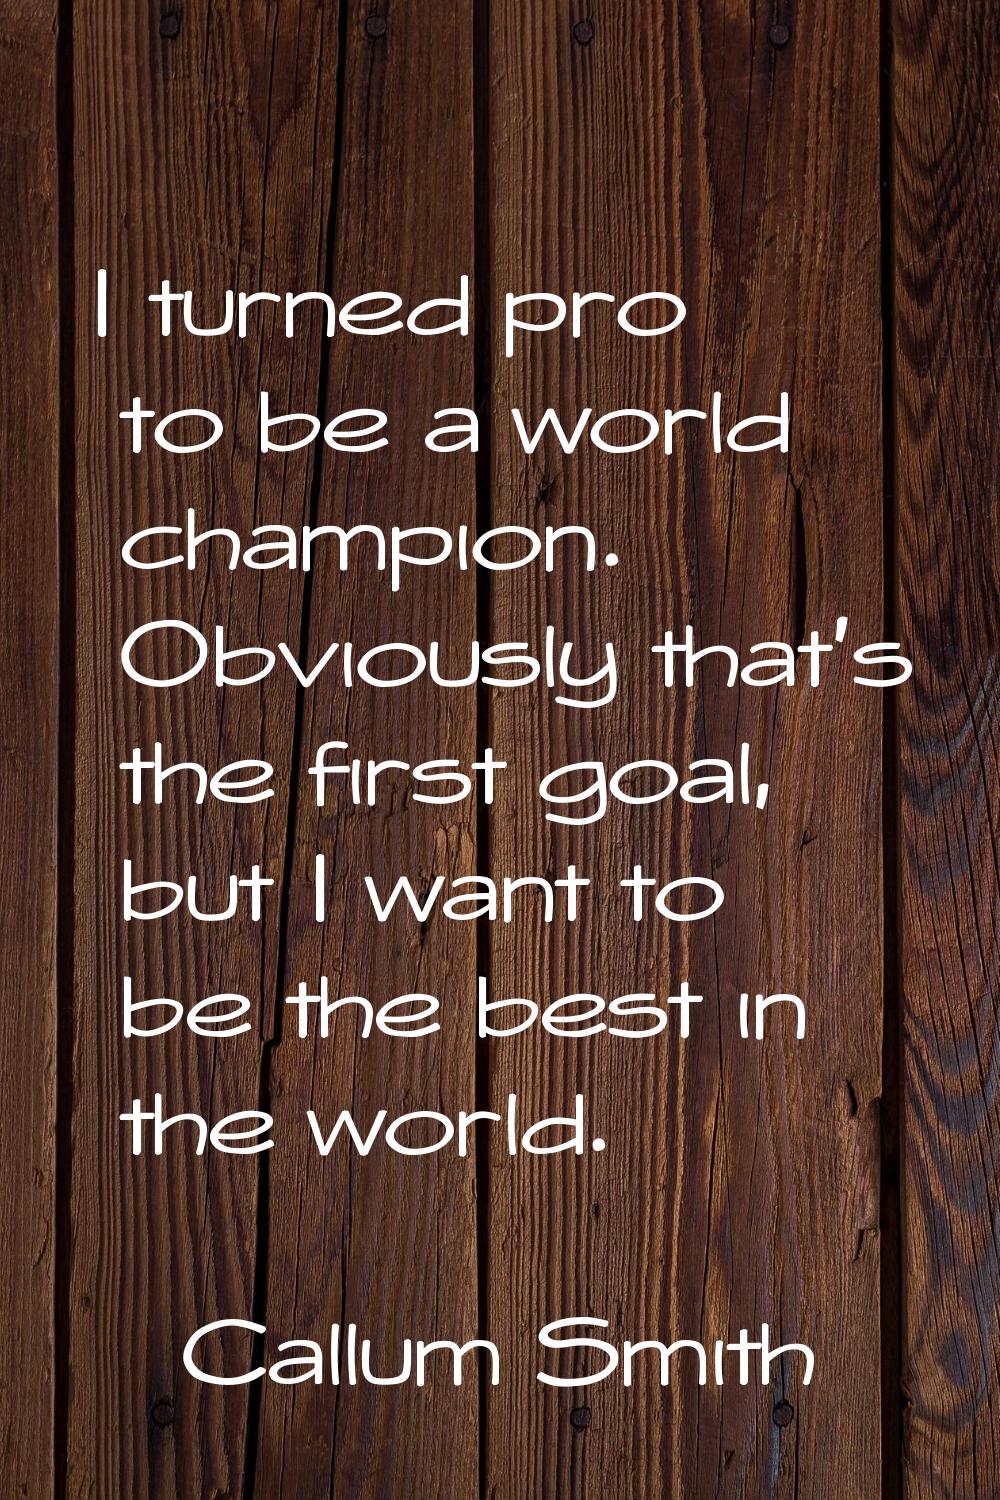 I turned pro to be a world champion. Obviously that's the first goal, but I want to be the best in 